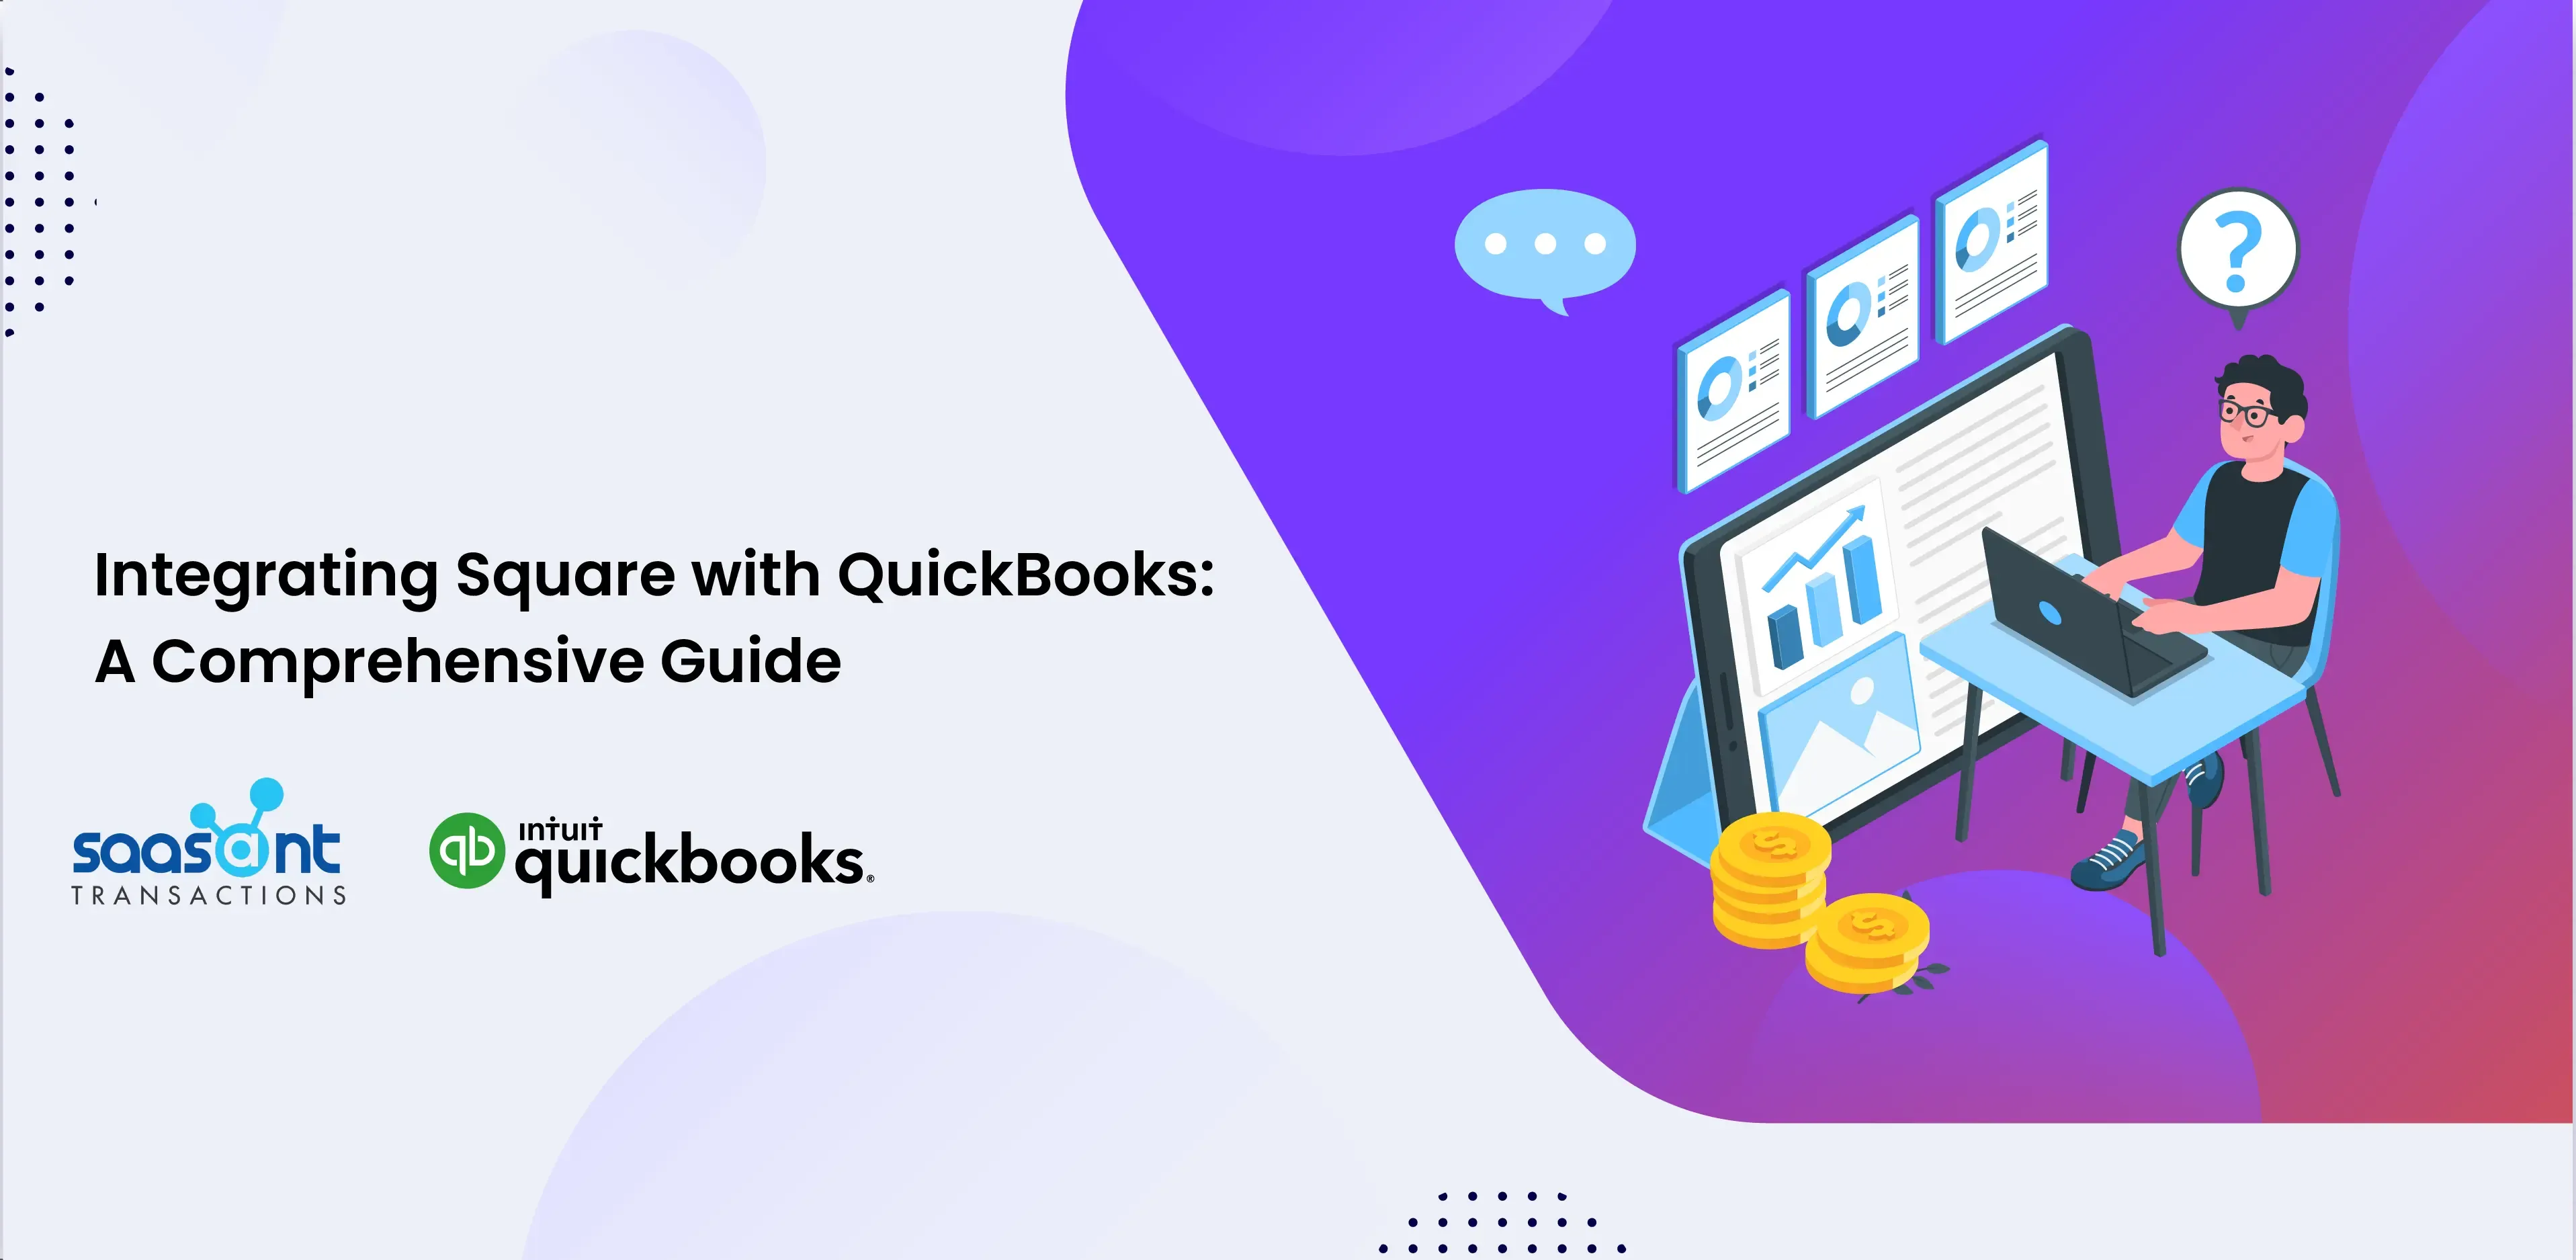 Integrating-Square-with-QuickBooks-A-Comprehensive-Guide.webp